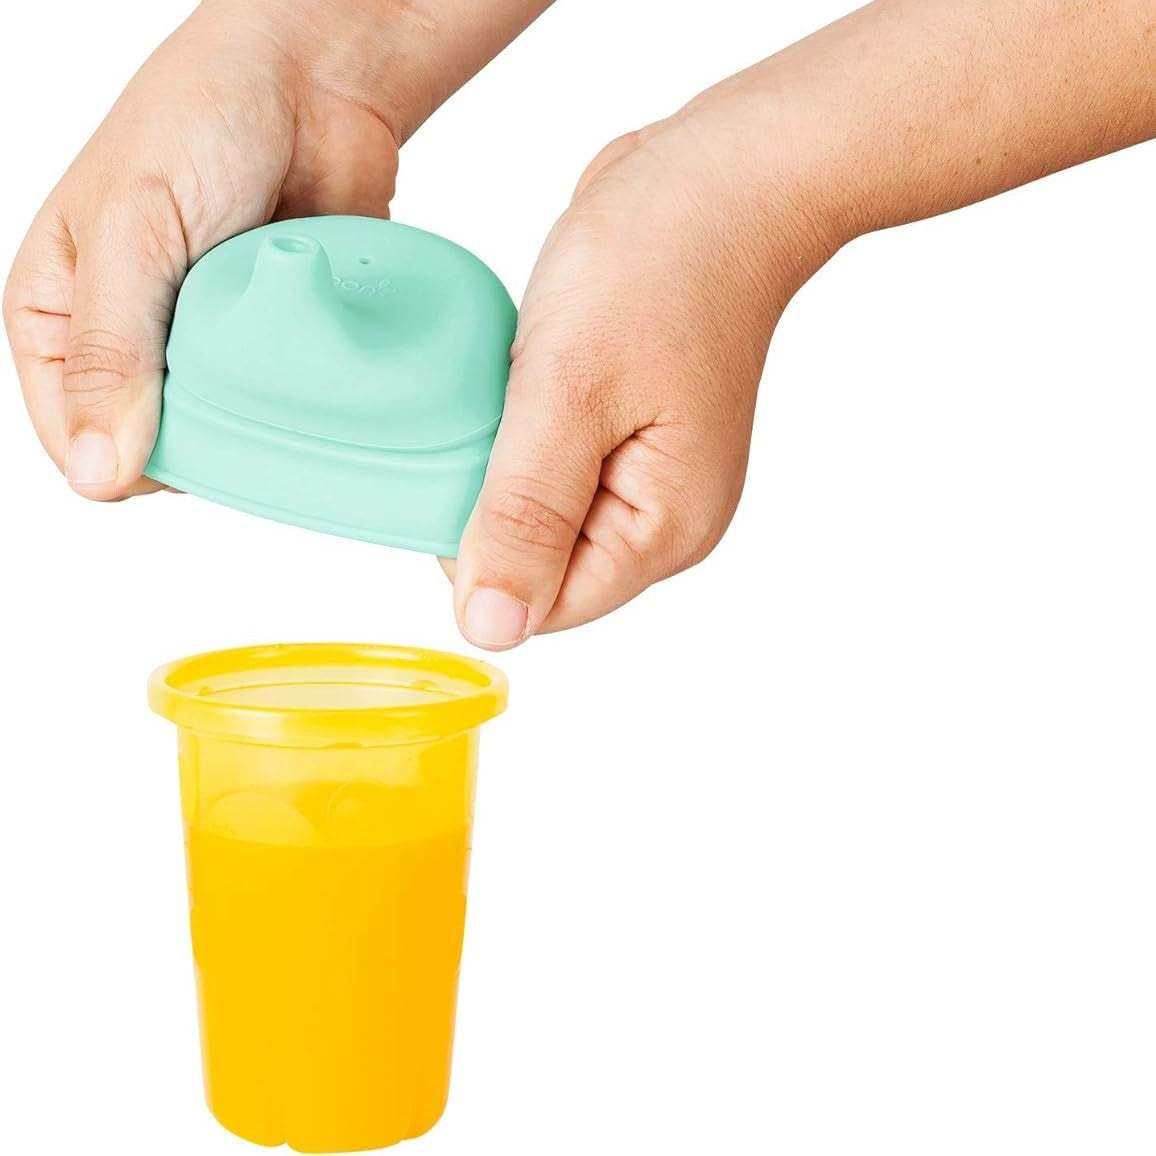 Non-Spill Silicone Sippy Cup Lids